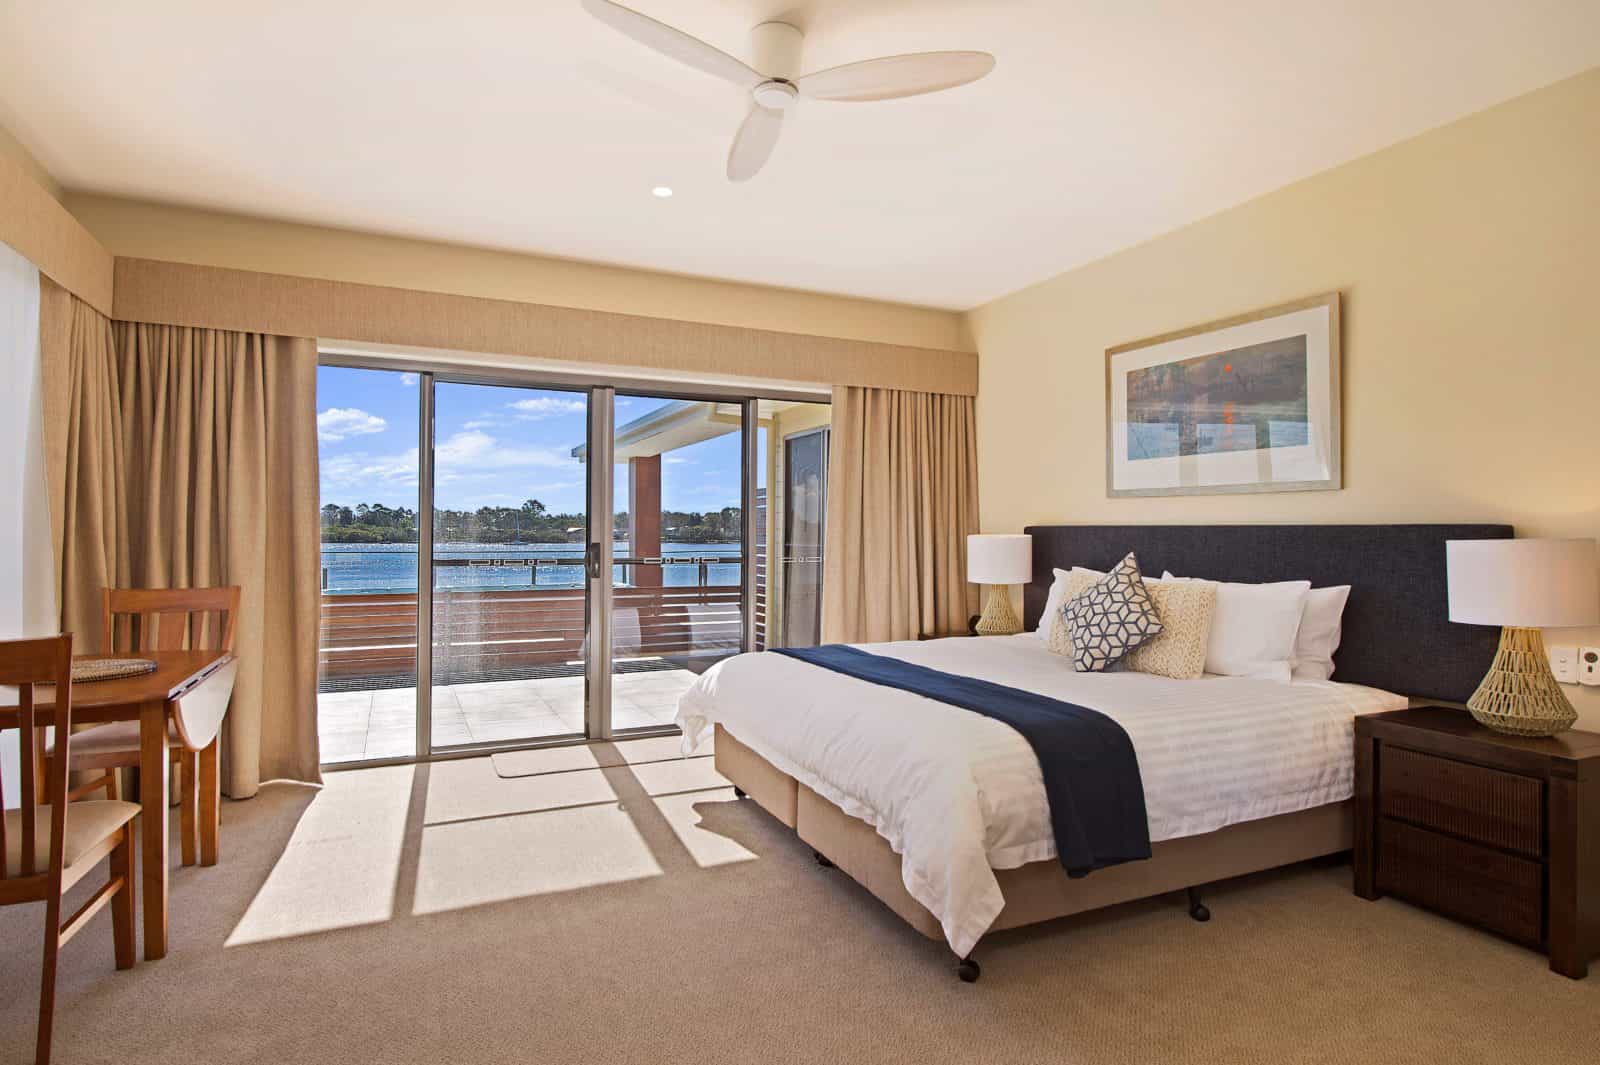 Superior King Room with River View and Spa Bath